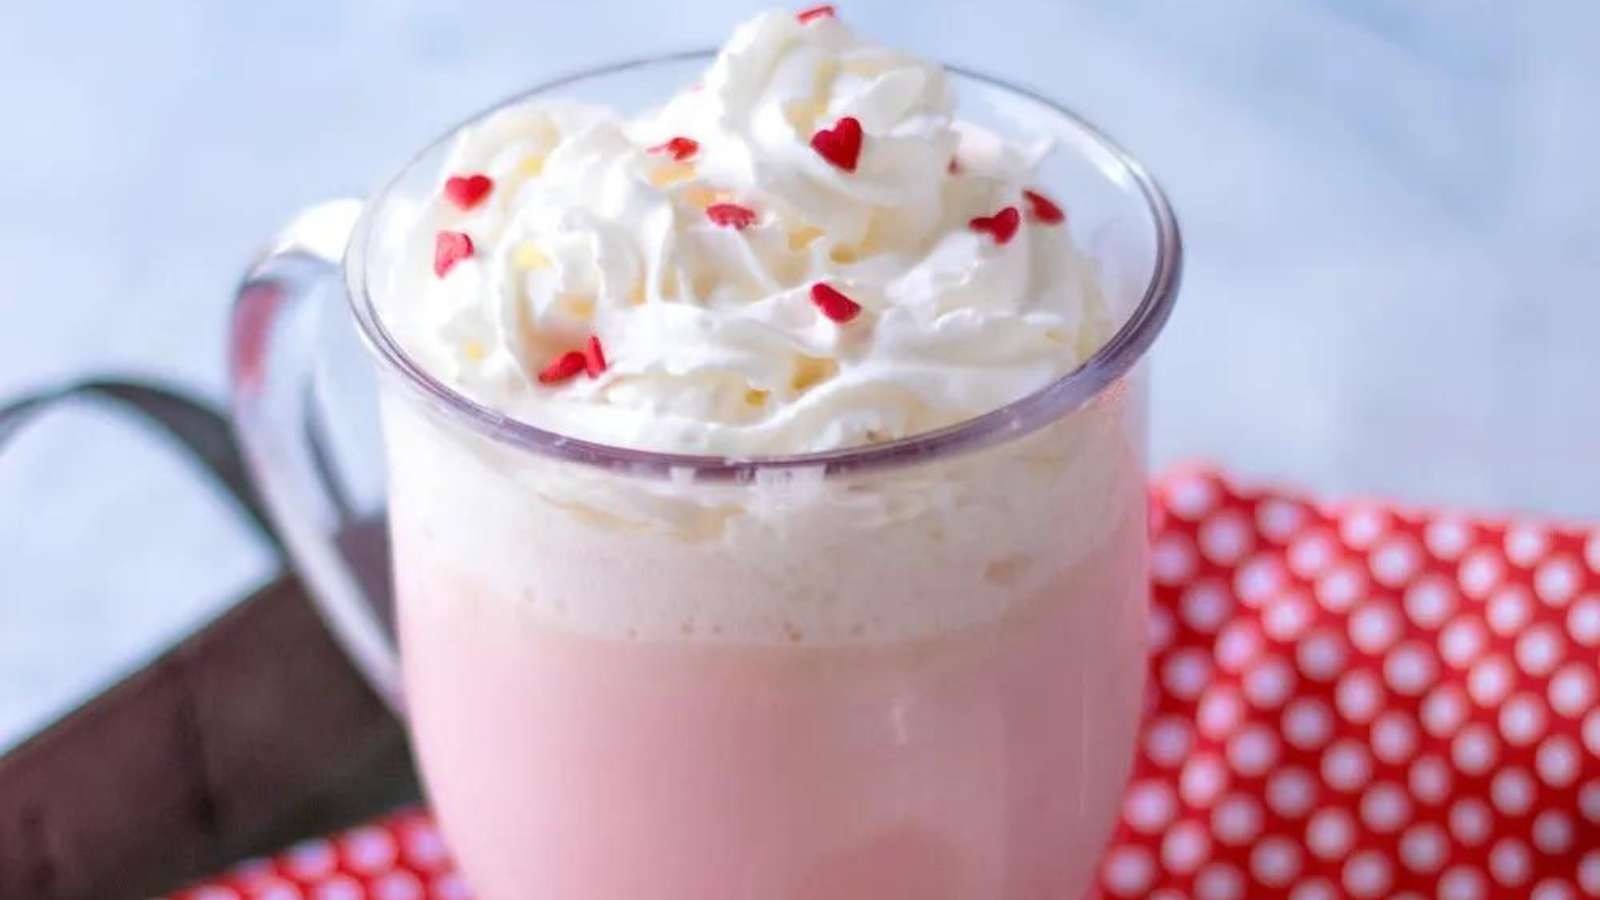 Pink hot chocolate with whipped cream.